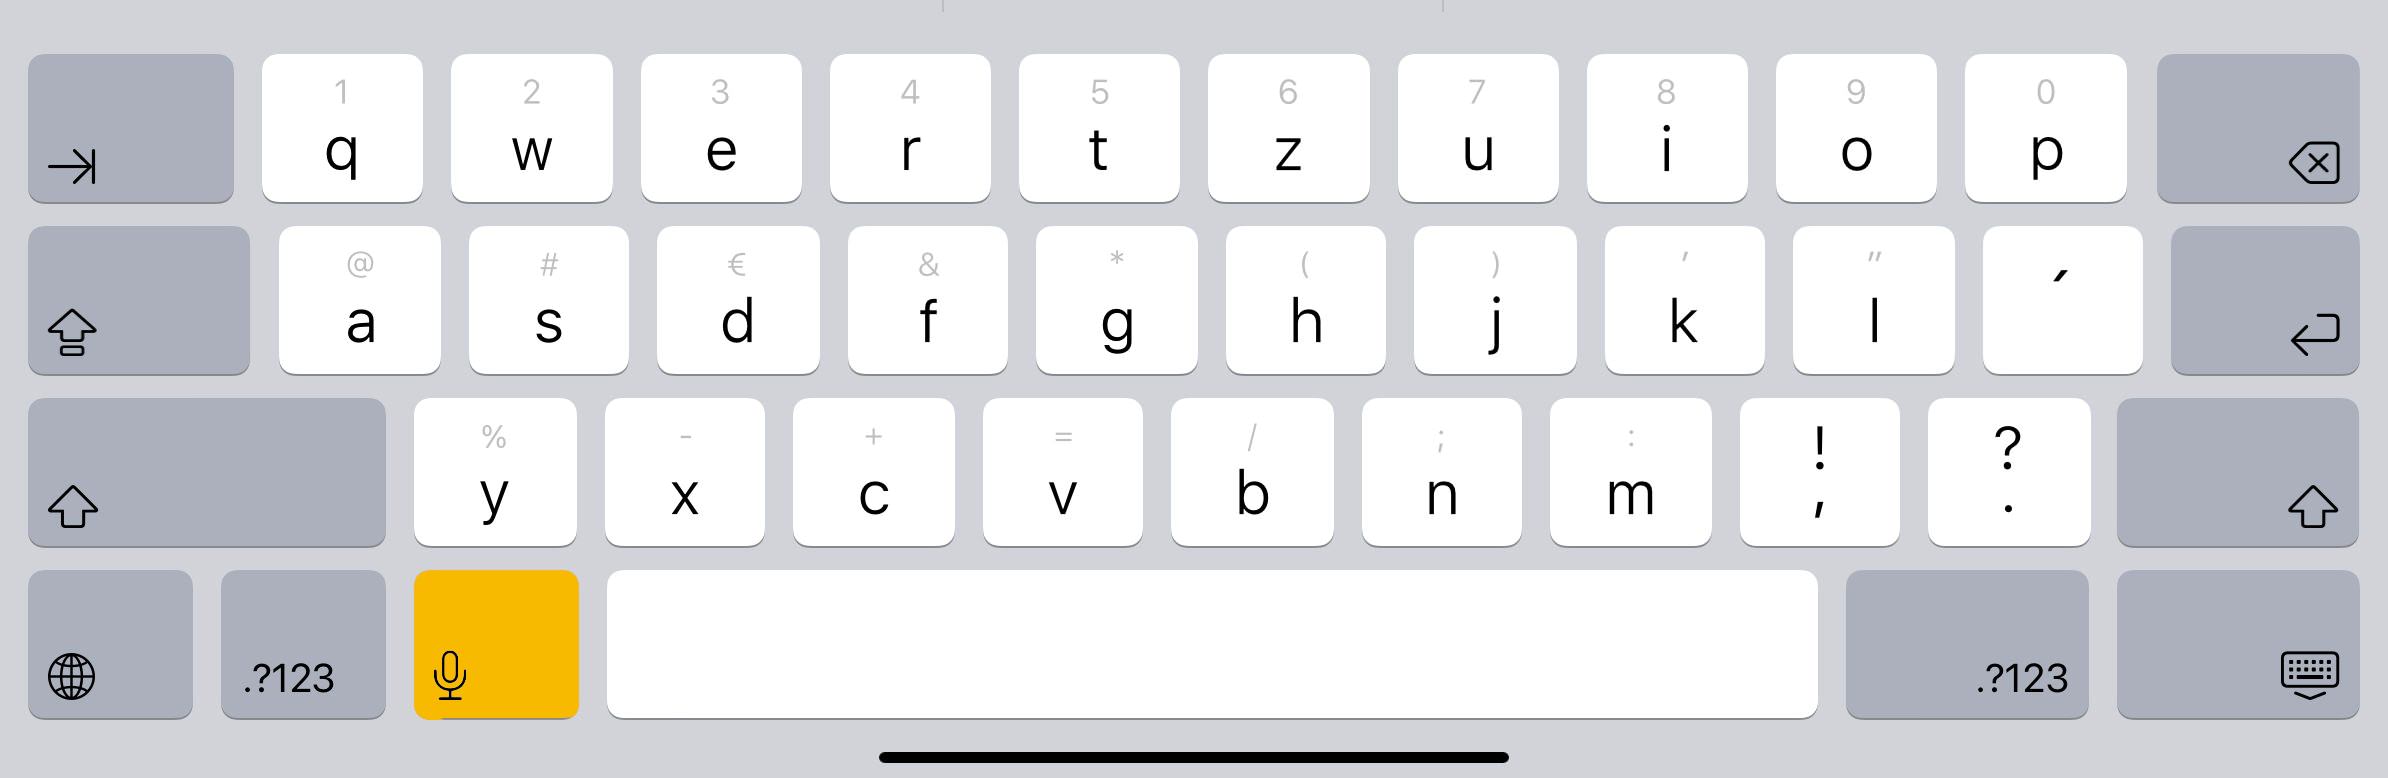 iOS keyboard with the microphone highlighted in yellow